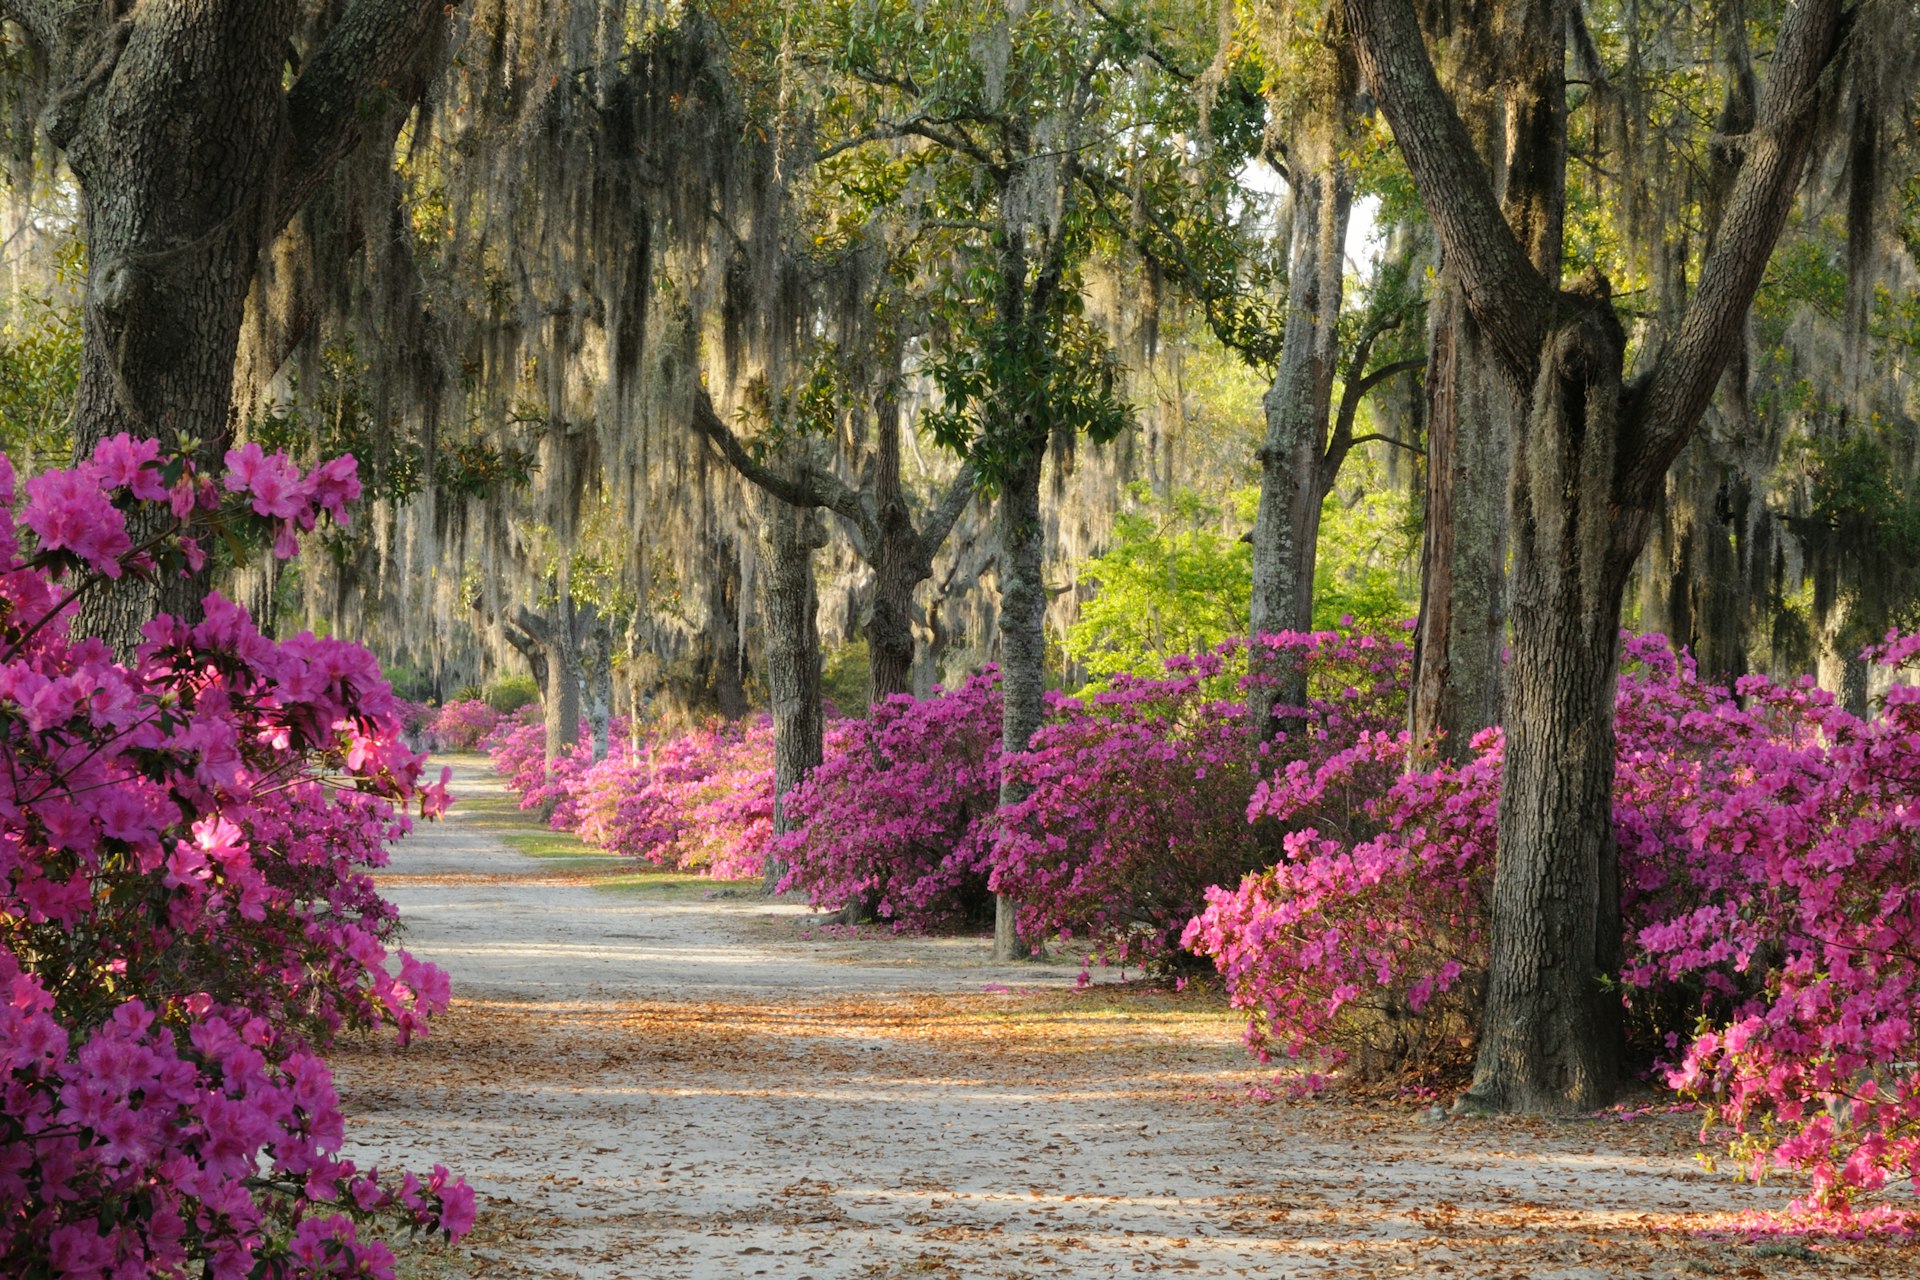 Road at  Bonaventure Cemetery in Savannah lined with Spanish Moss covered Live Oak Trees and Azaleas